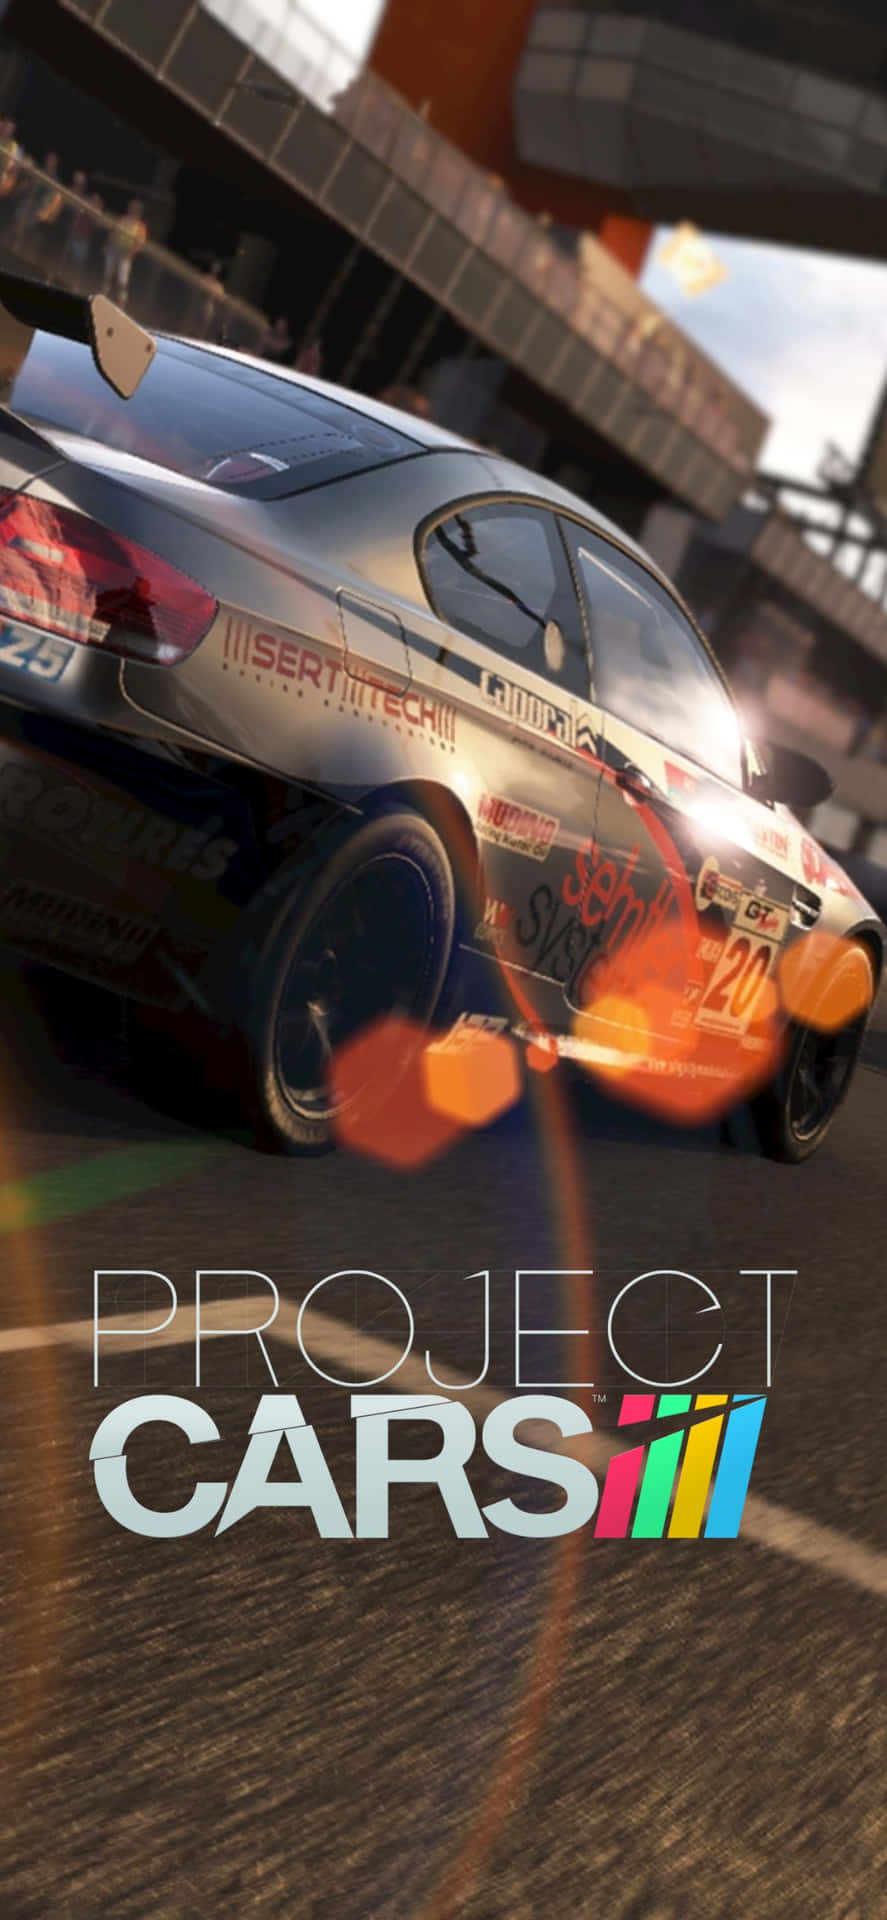 Up close and in detail - the incredible power of Iphone Xs Project Cars